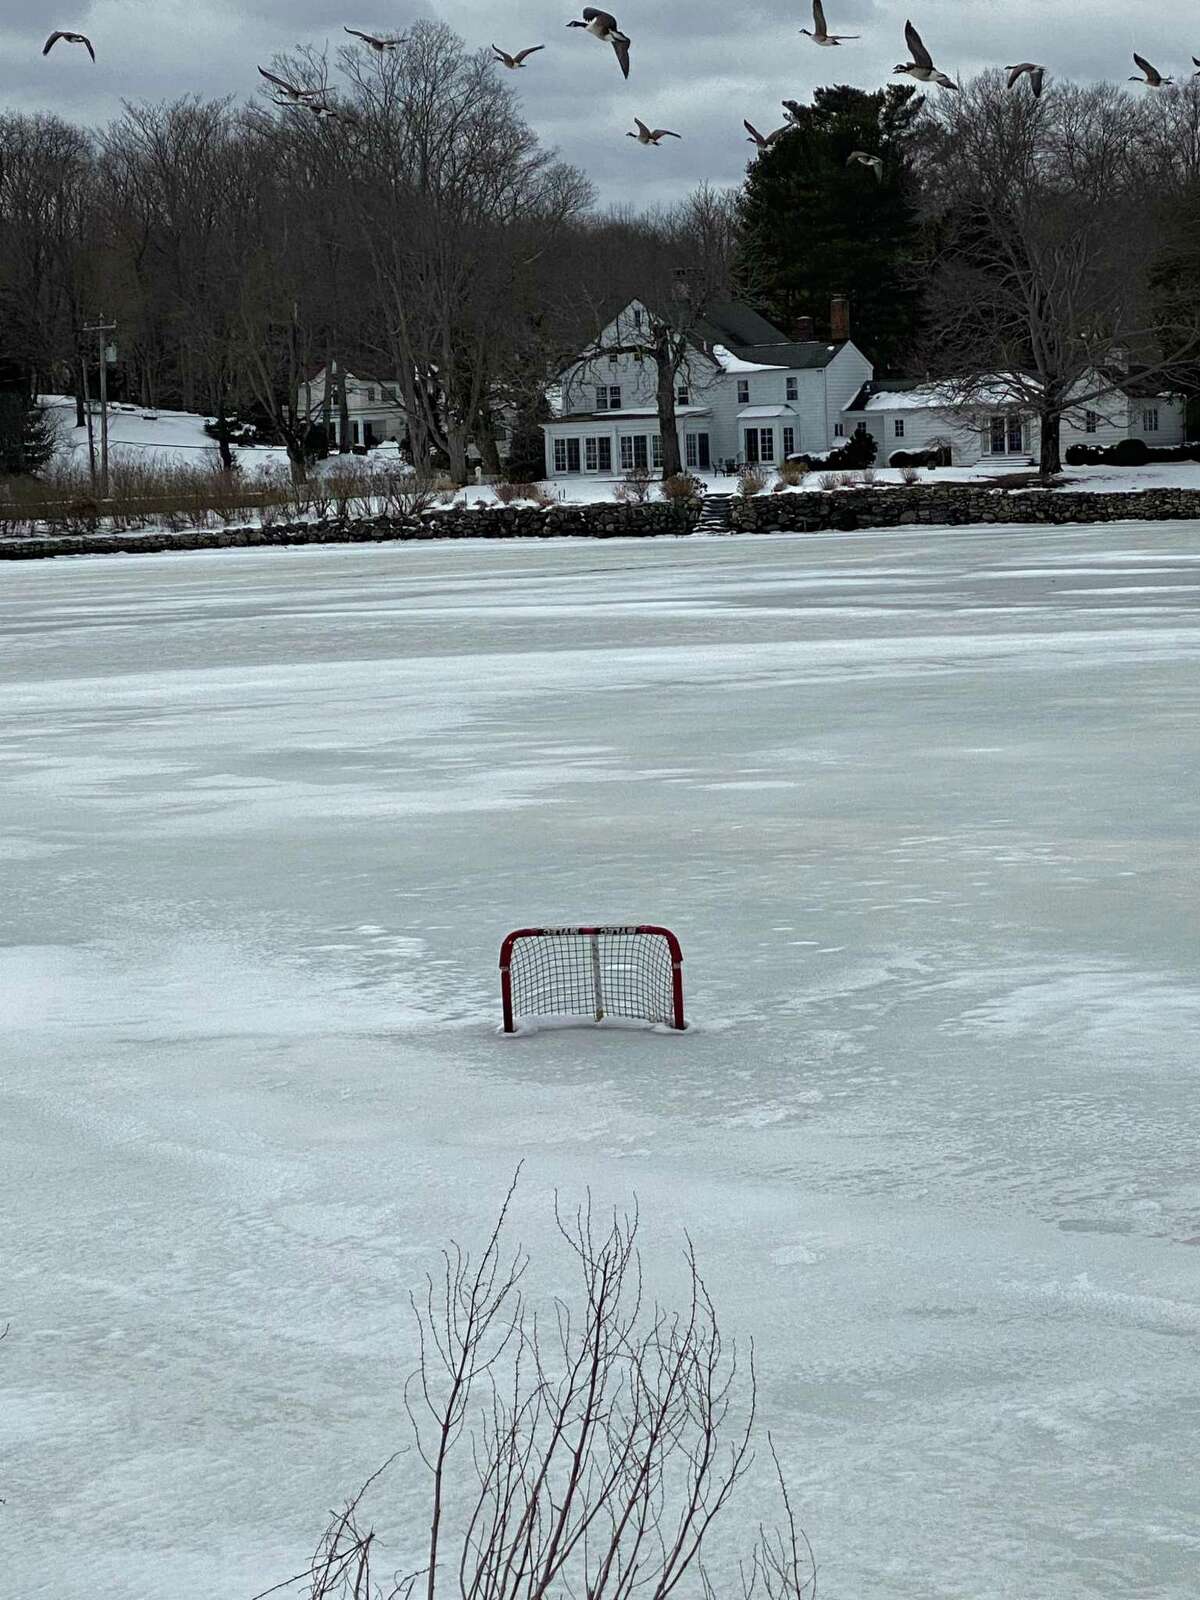 Friends of Gorham's Pond and neighbors implore those who use the pond for skating to clean up after themselves. A hockey net left in the melting ice will sink to the bottom and get stuck in the mud, creating a hazard for the many forms of widlife that call the pond home.